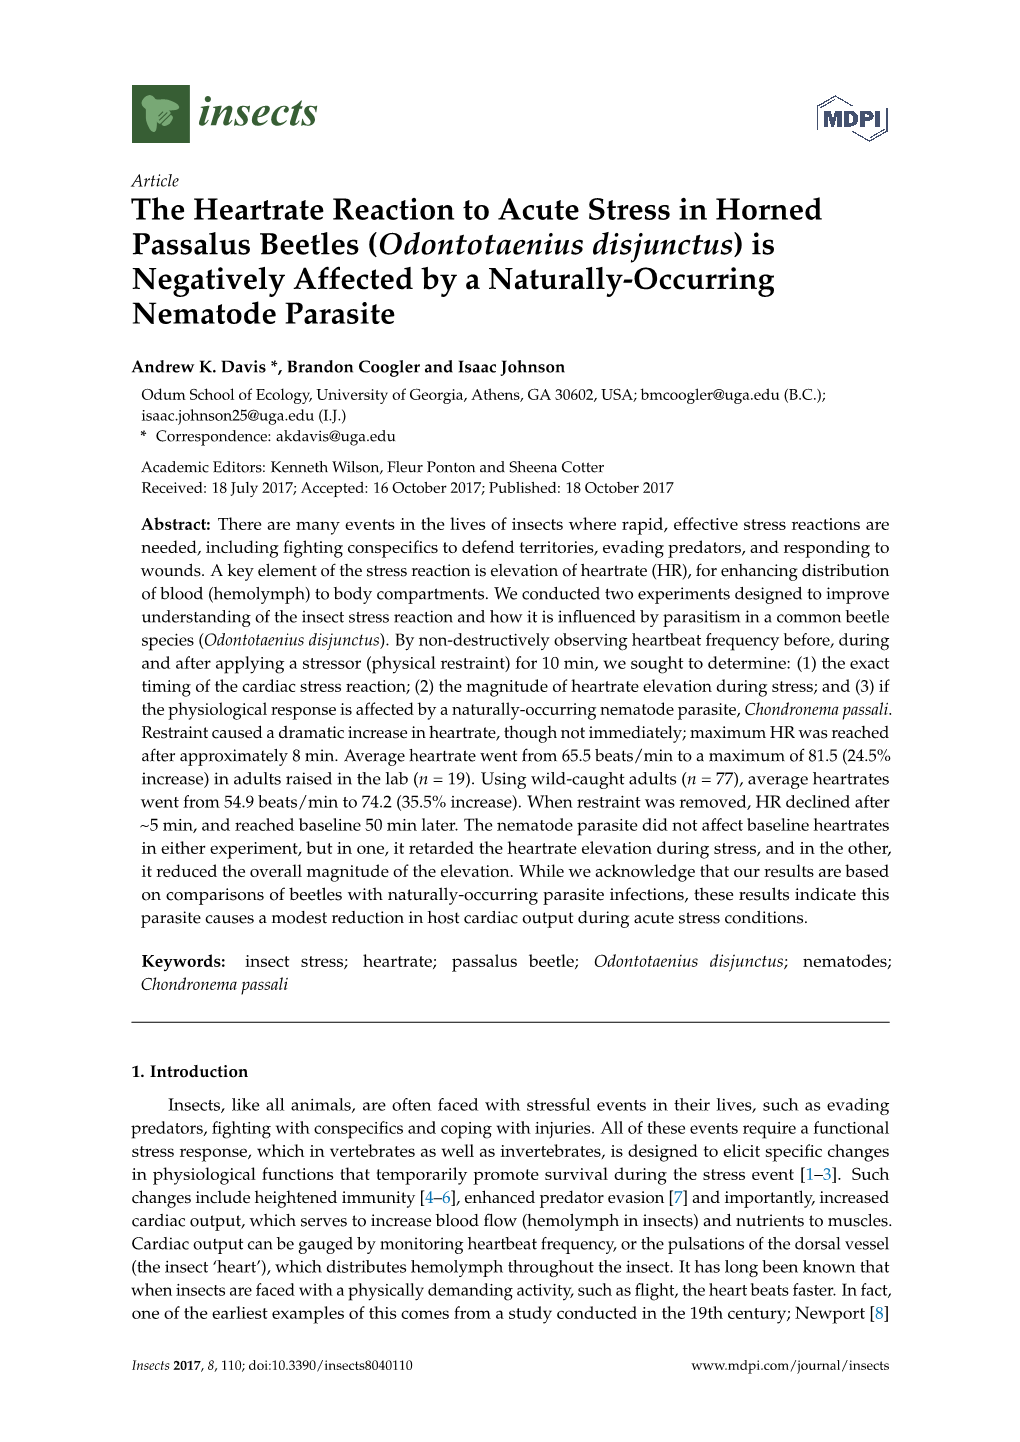 The Heartrate Reaction to Acute Stress in Horned Passalus Beetles (Odontotaenius Disjunctus) Is Negatively Affected by a Naturally-Occurring Nematode Parasite